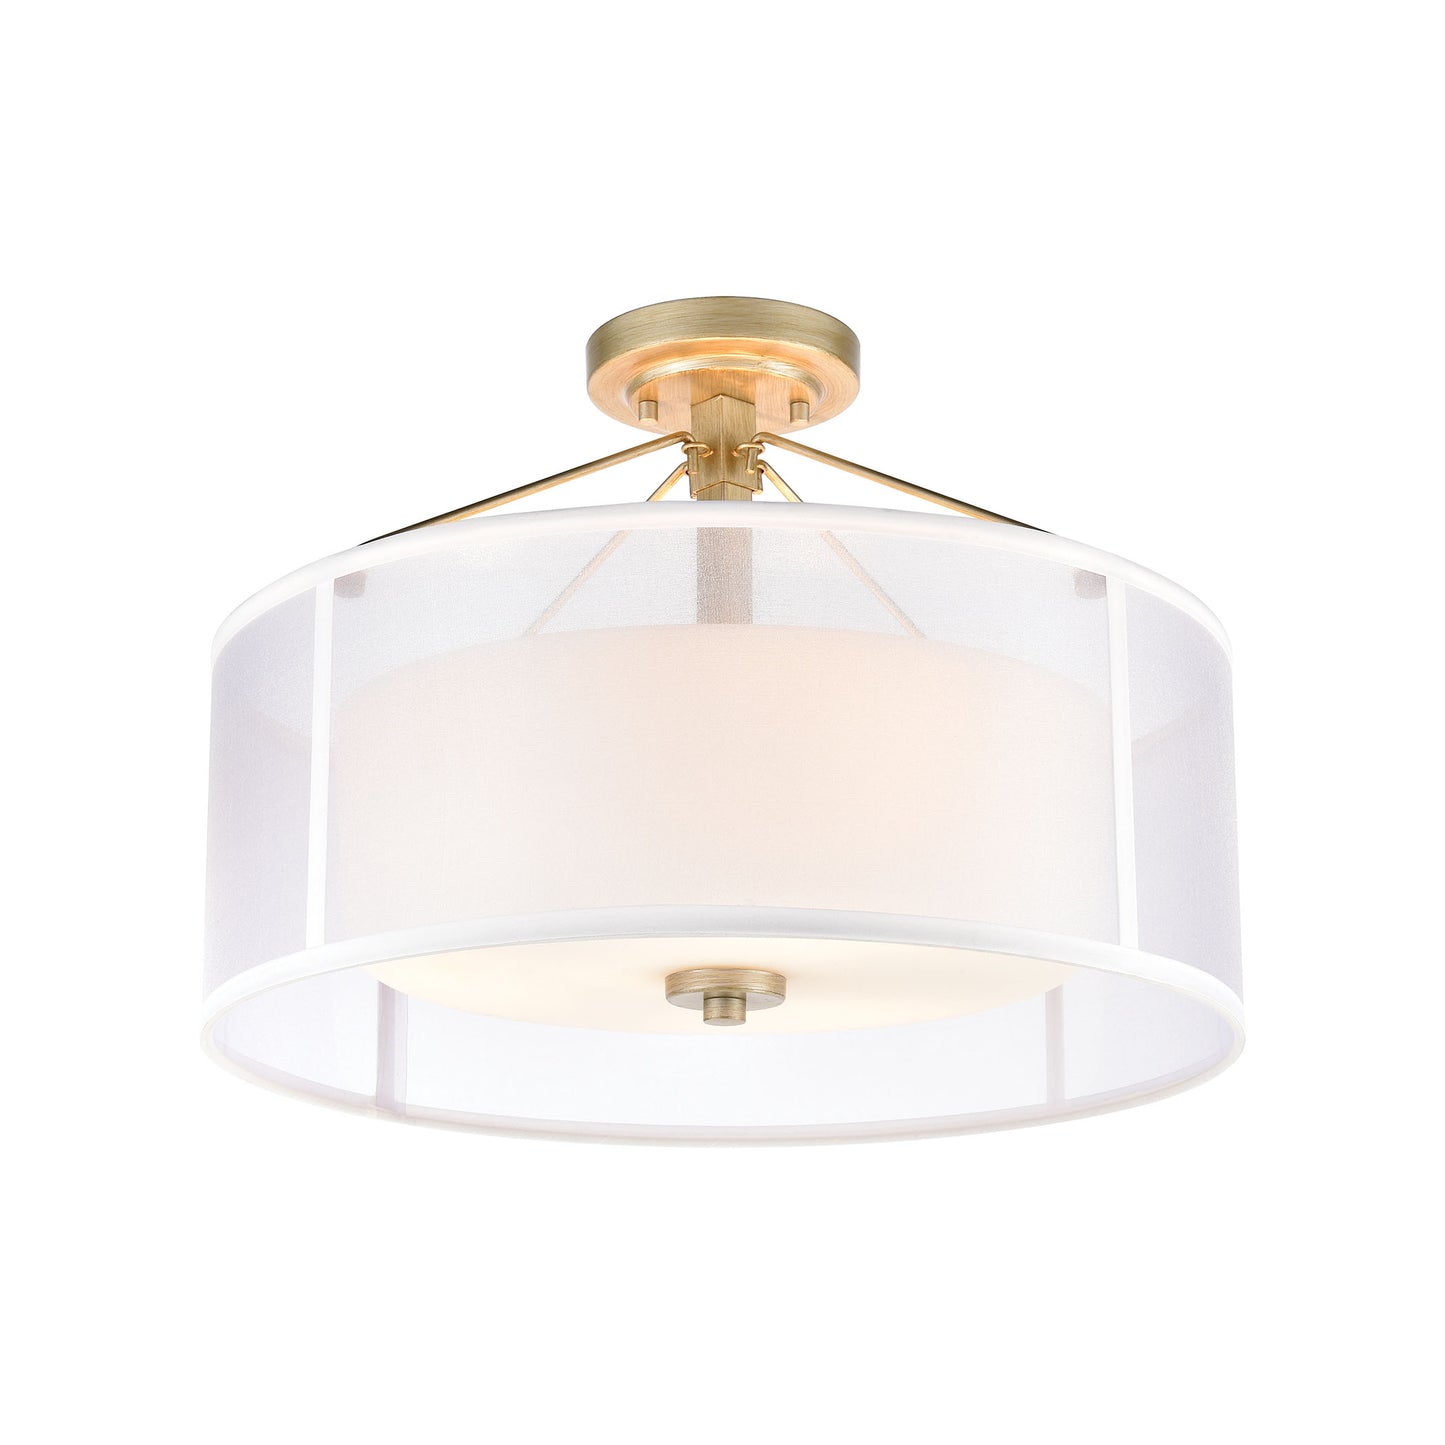 ELK Lighting 57034/3 - Diffusion 18" Wide 3-Light Semi Flush Mount in Aged Silver with Frosted Glass